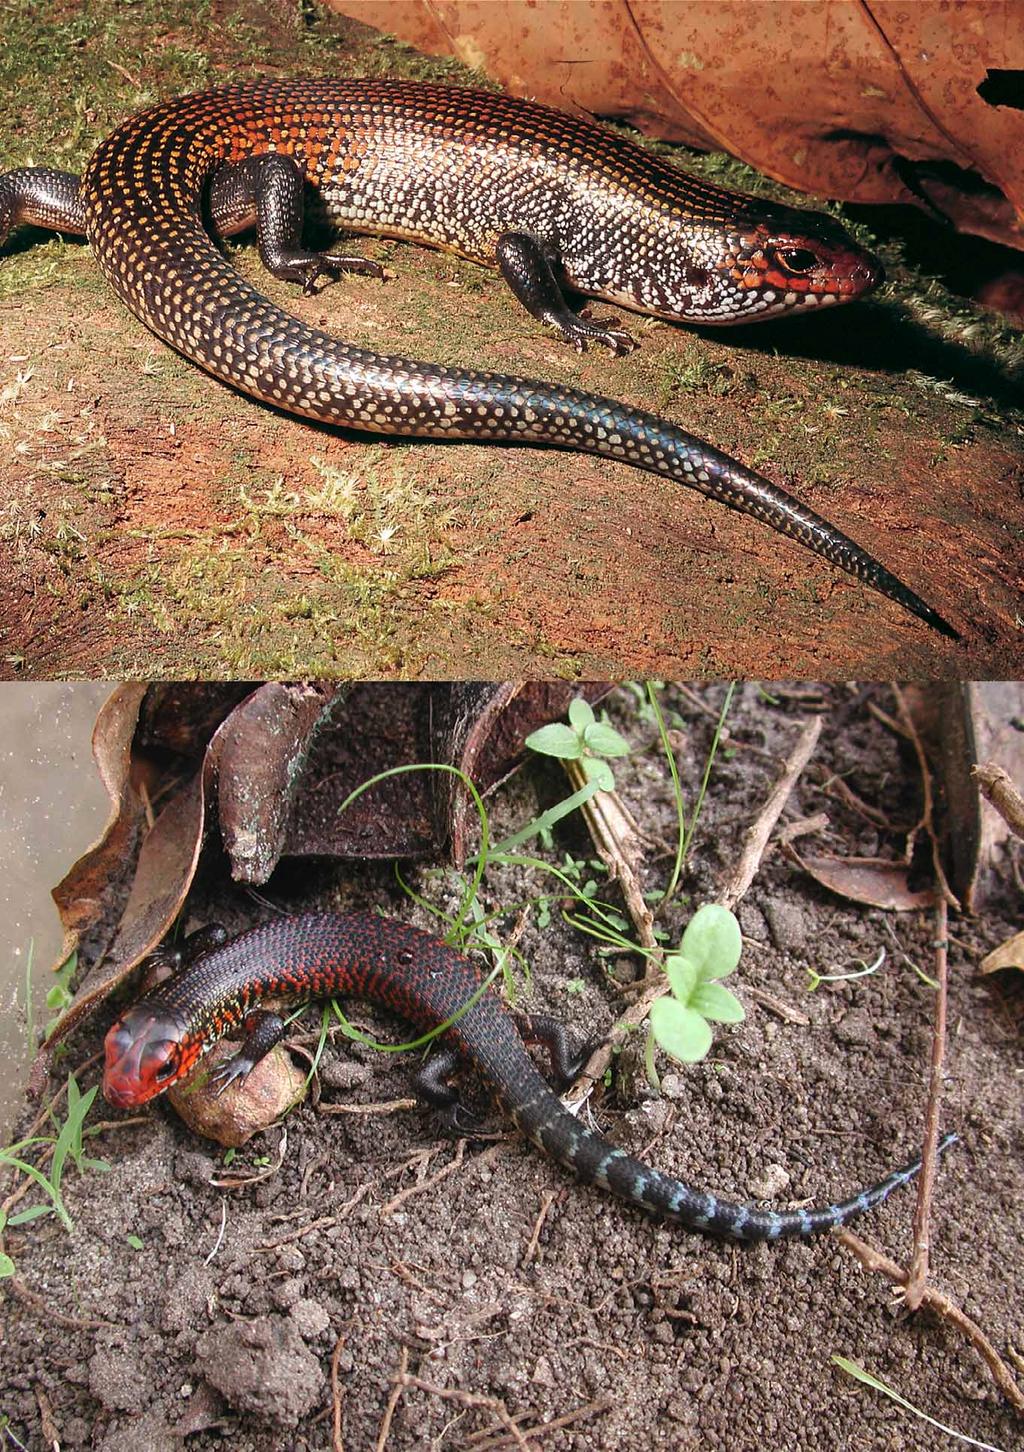 L. striatus is white, and only more or less white in L. fernandi, who shows consistently pale red stripes; L. fernandi and L. striatus have a throat speckled with darker spots, L.